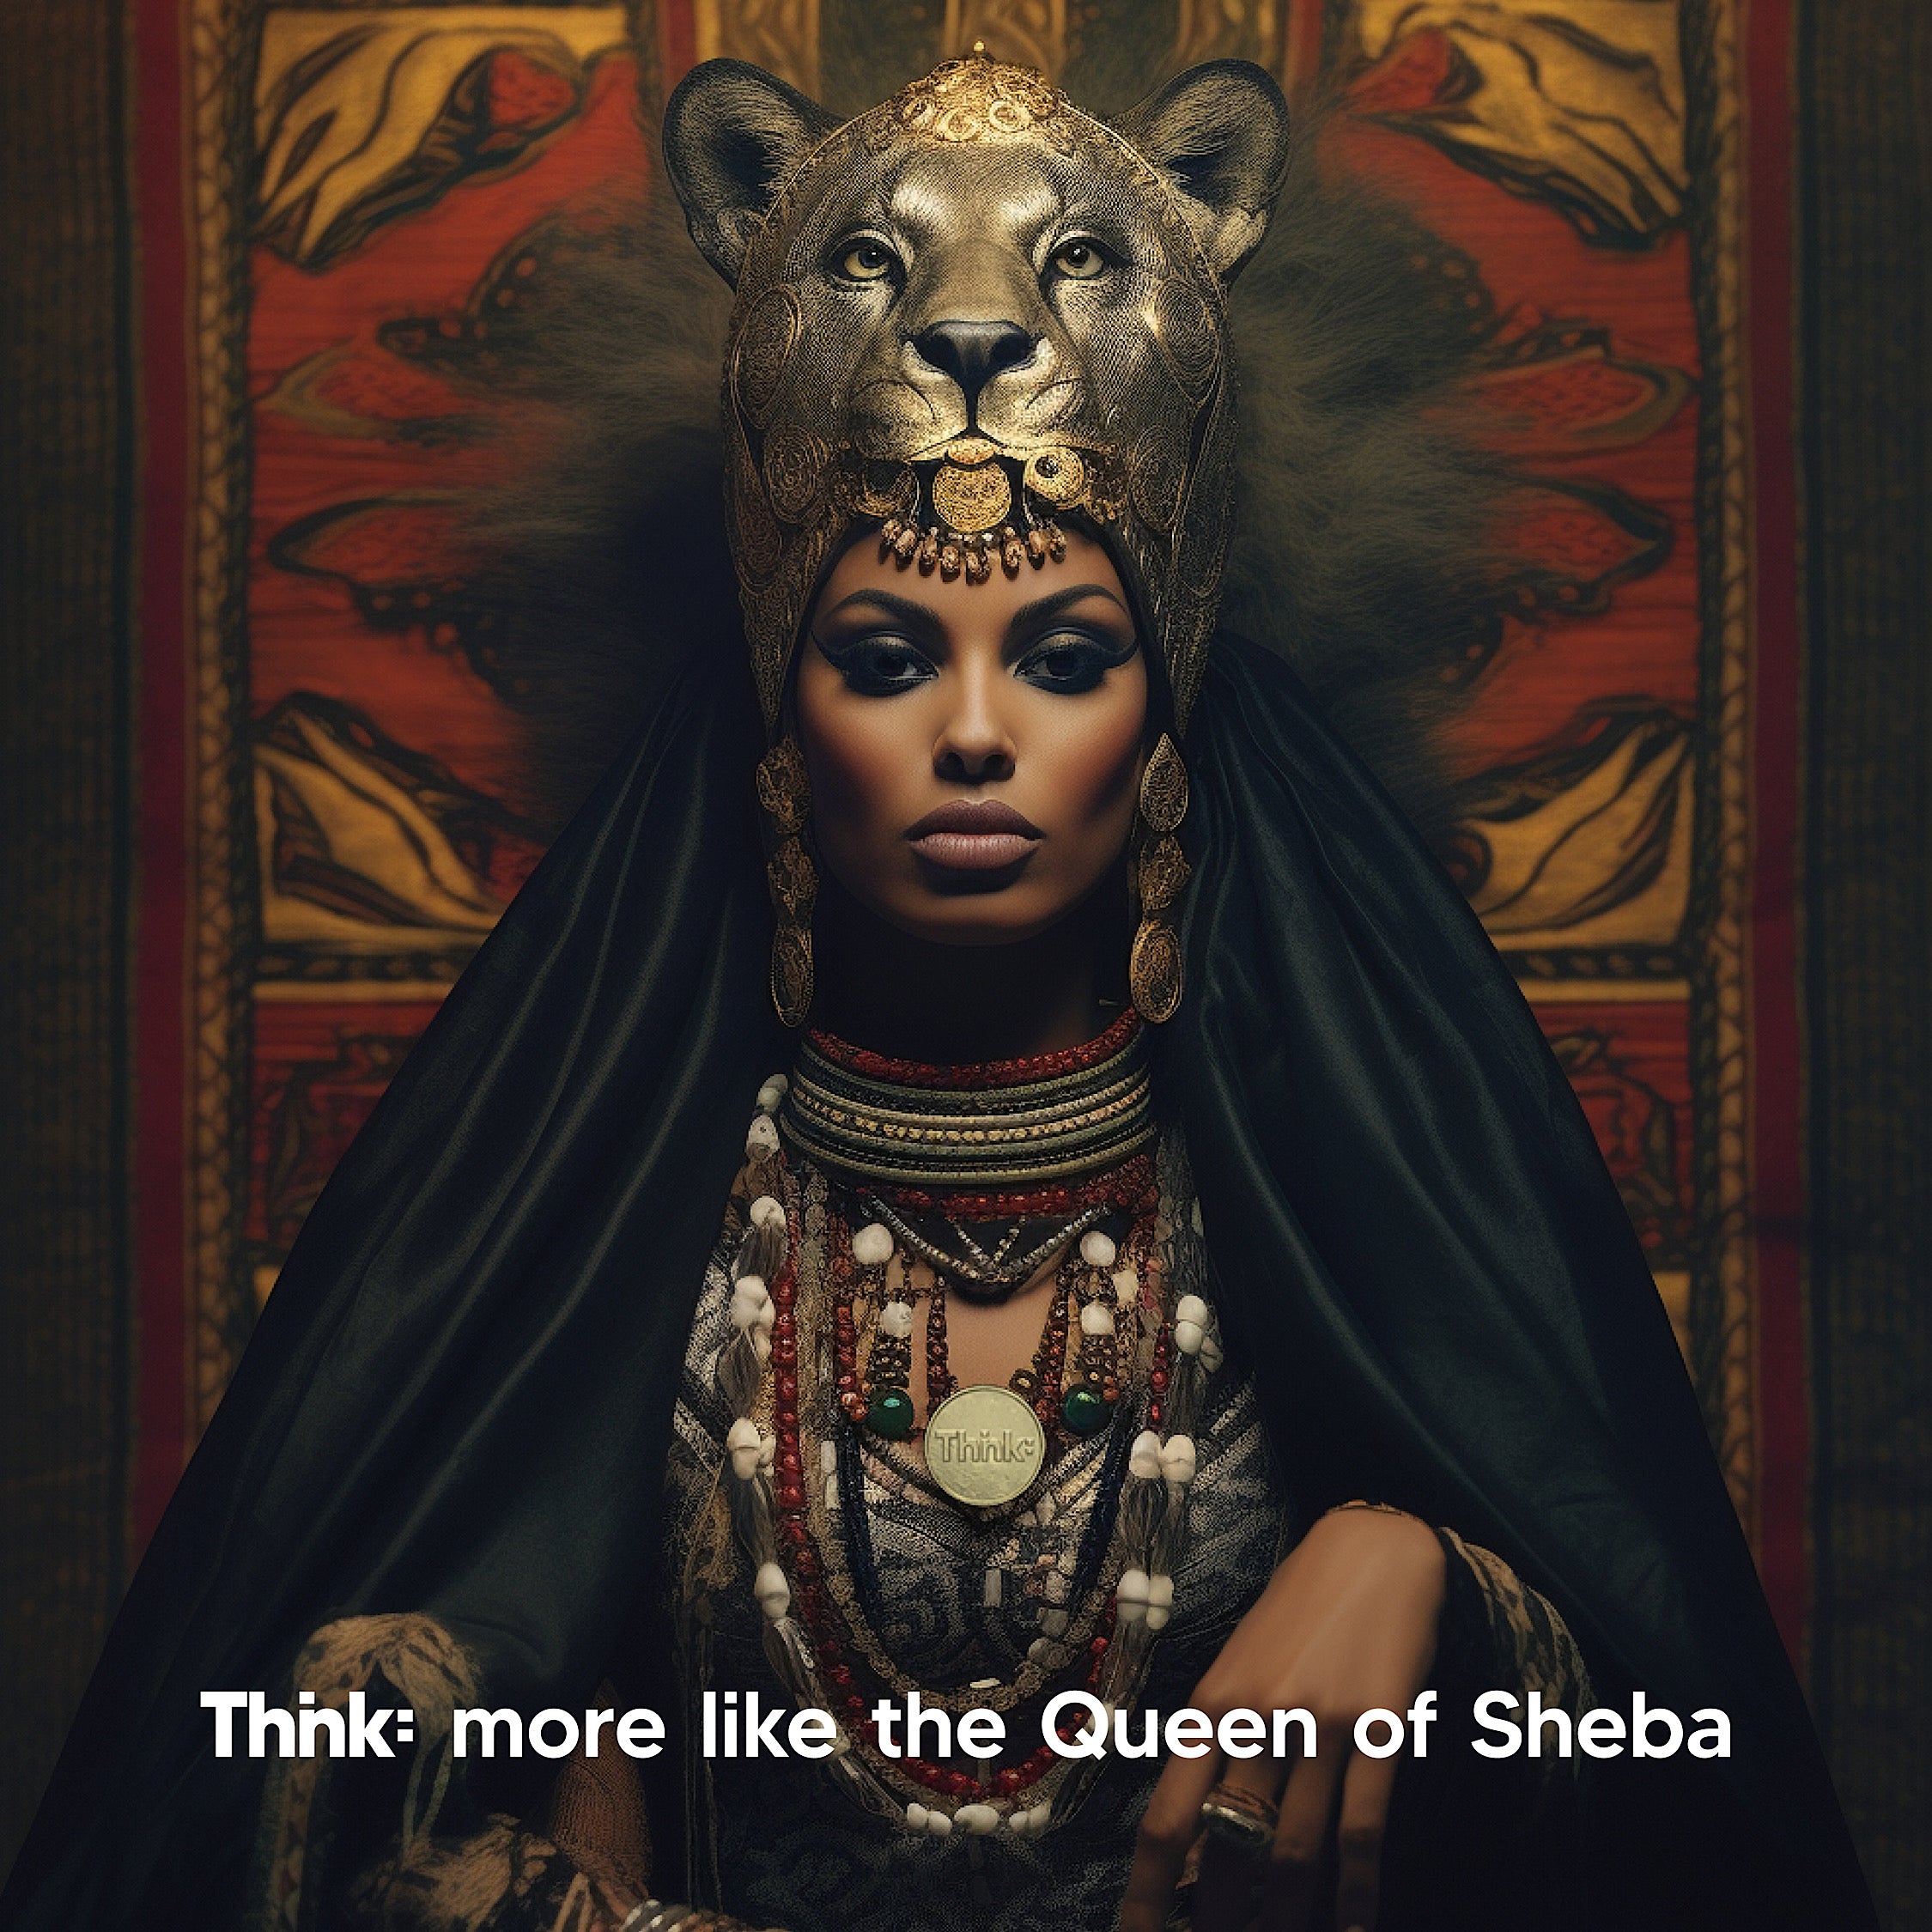 Thnk: More Like Queen of Sheba